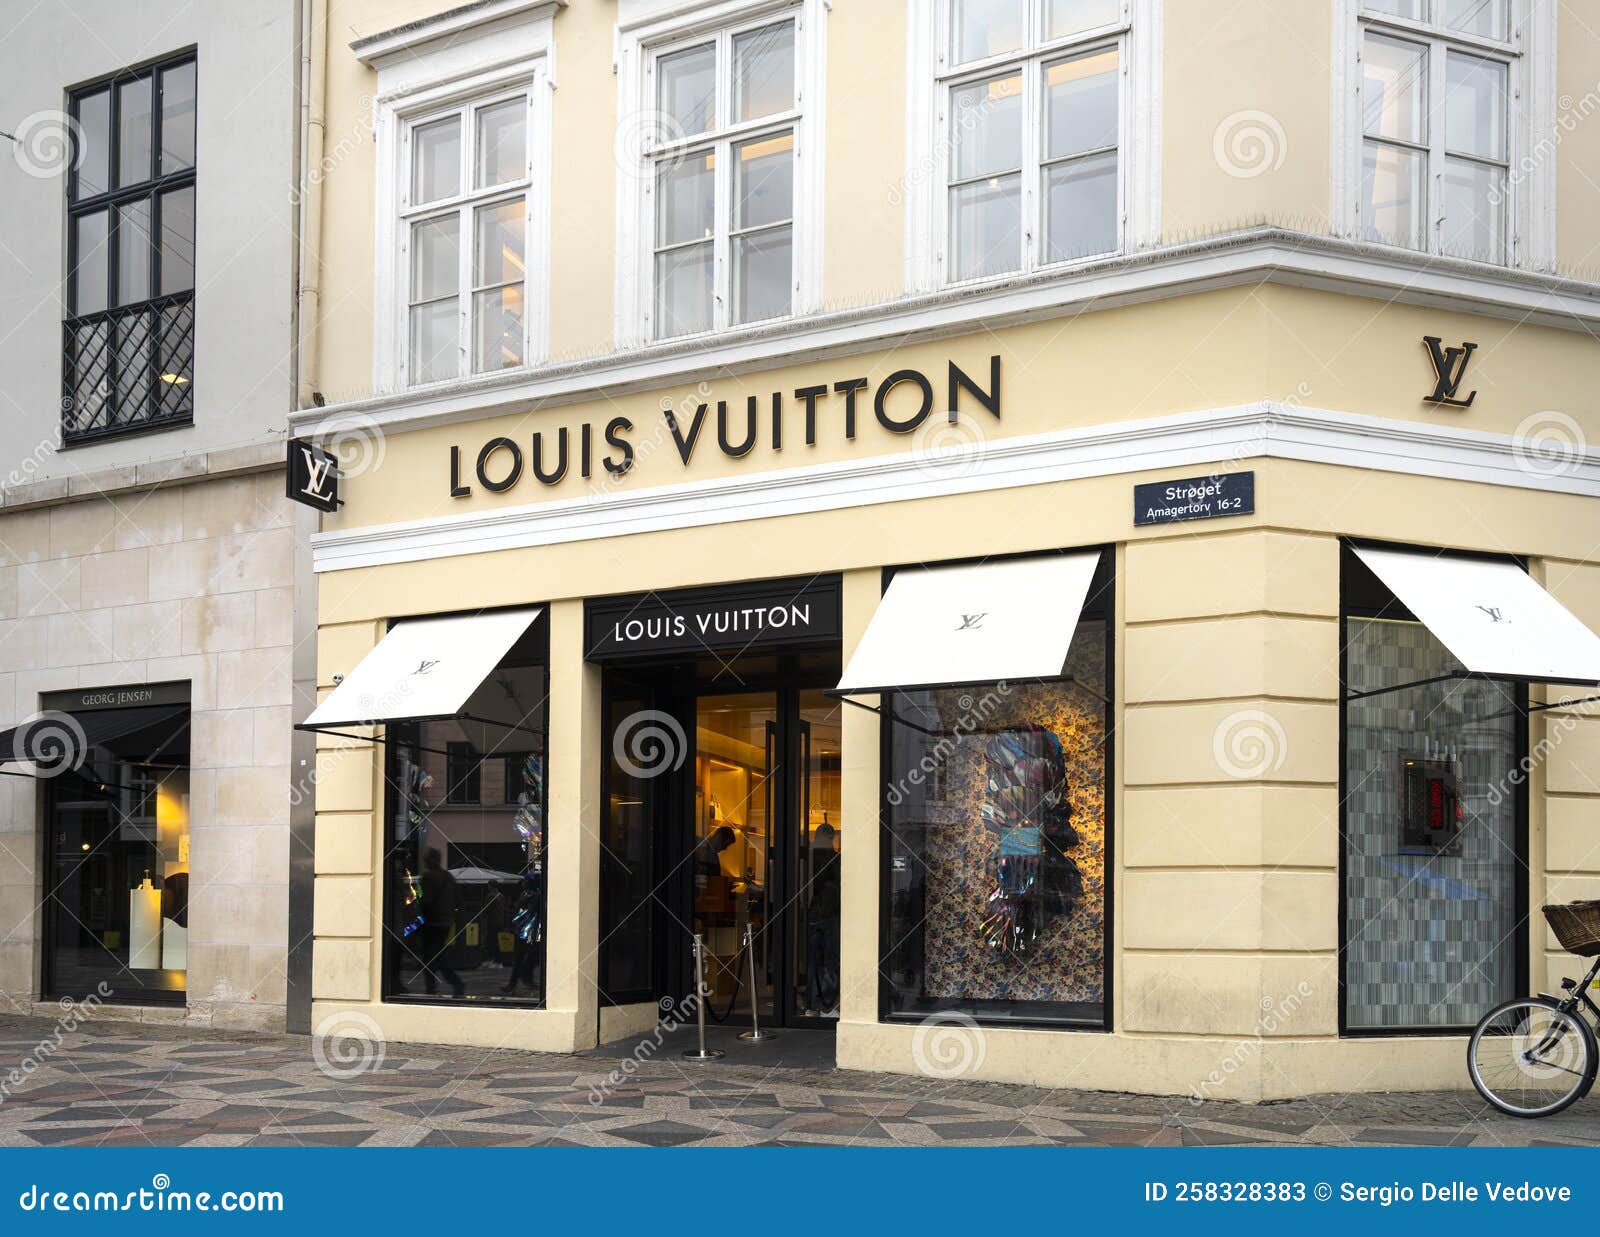 louis vuitton store closest to me